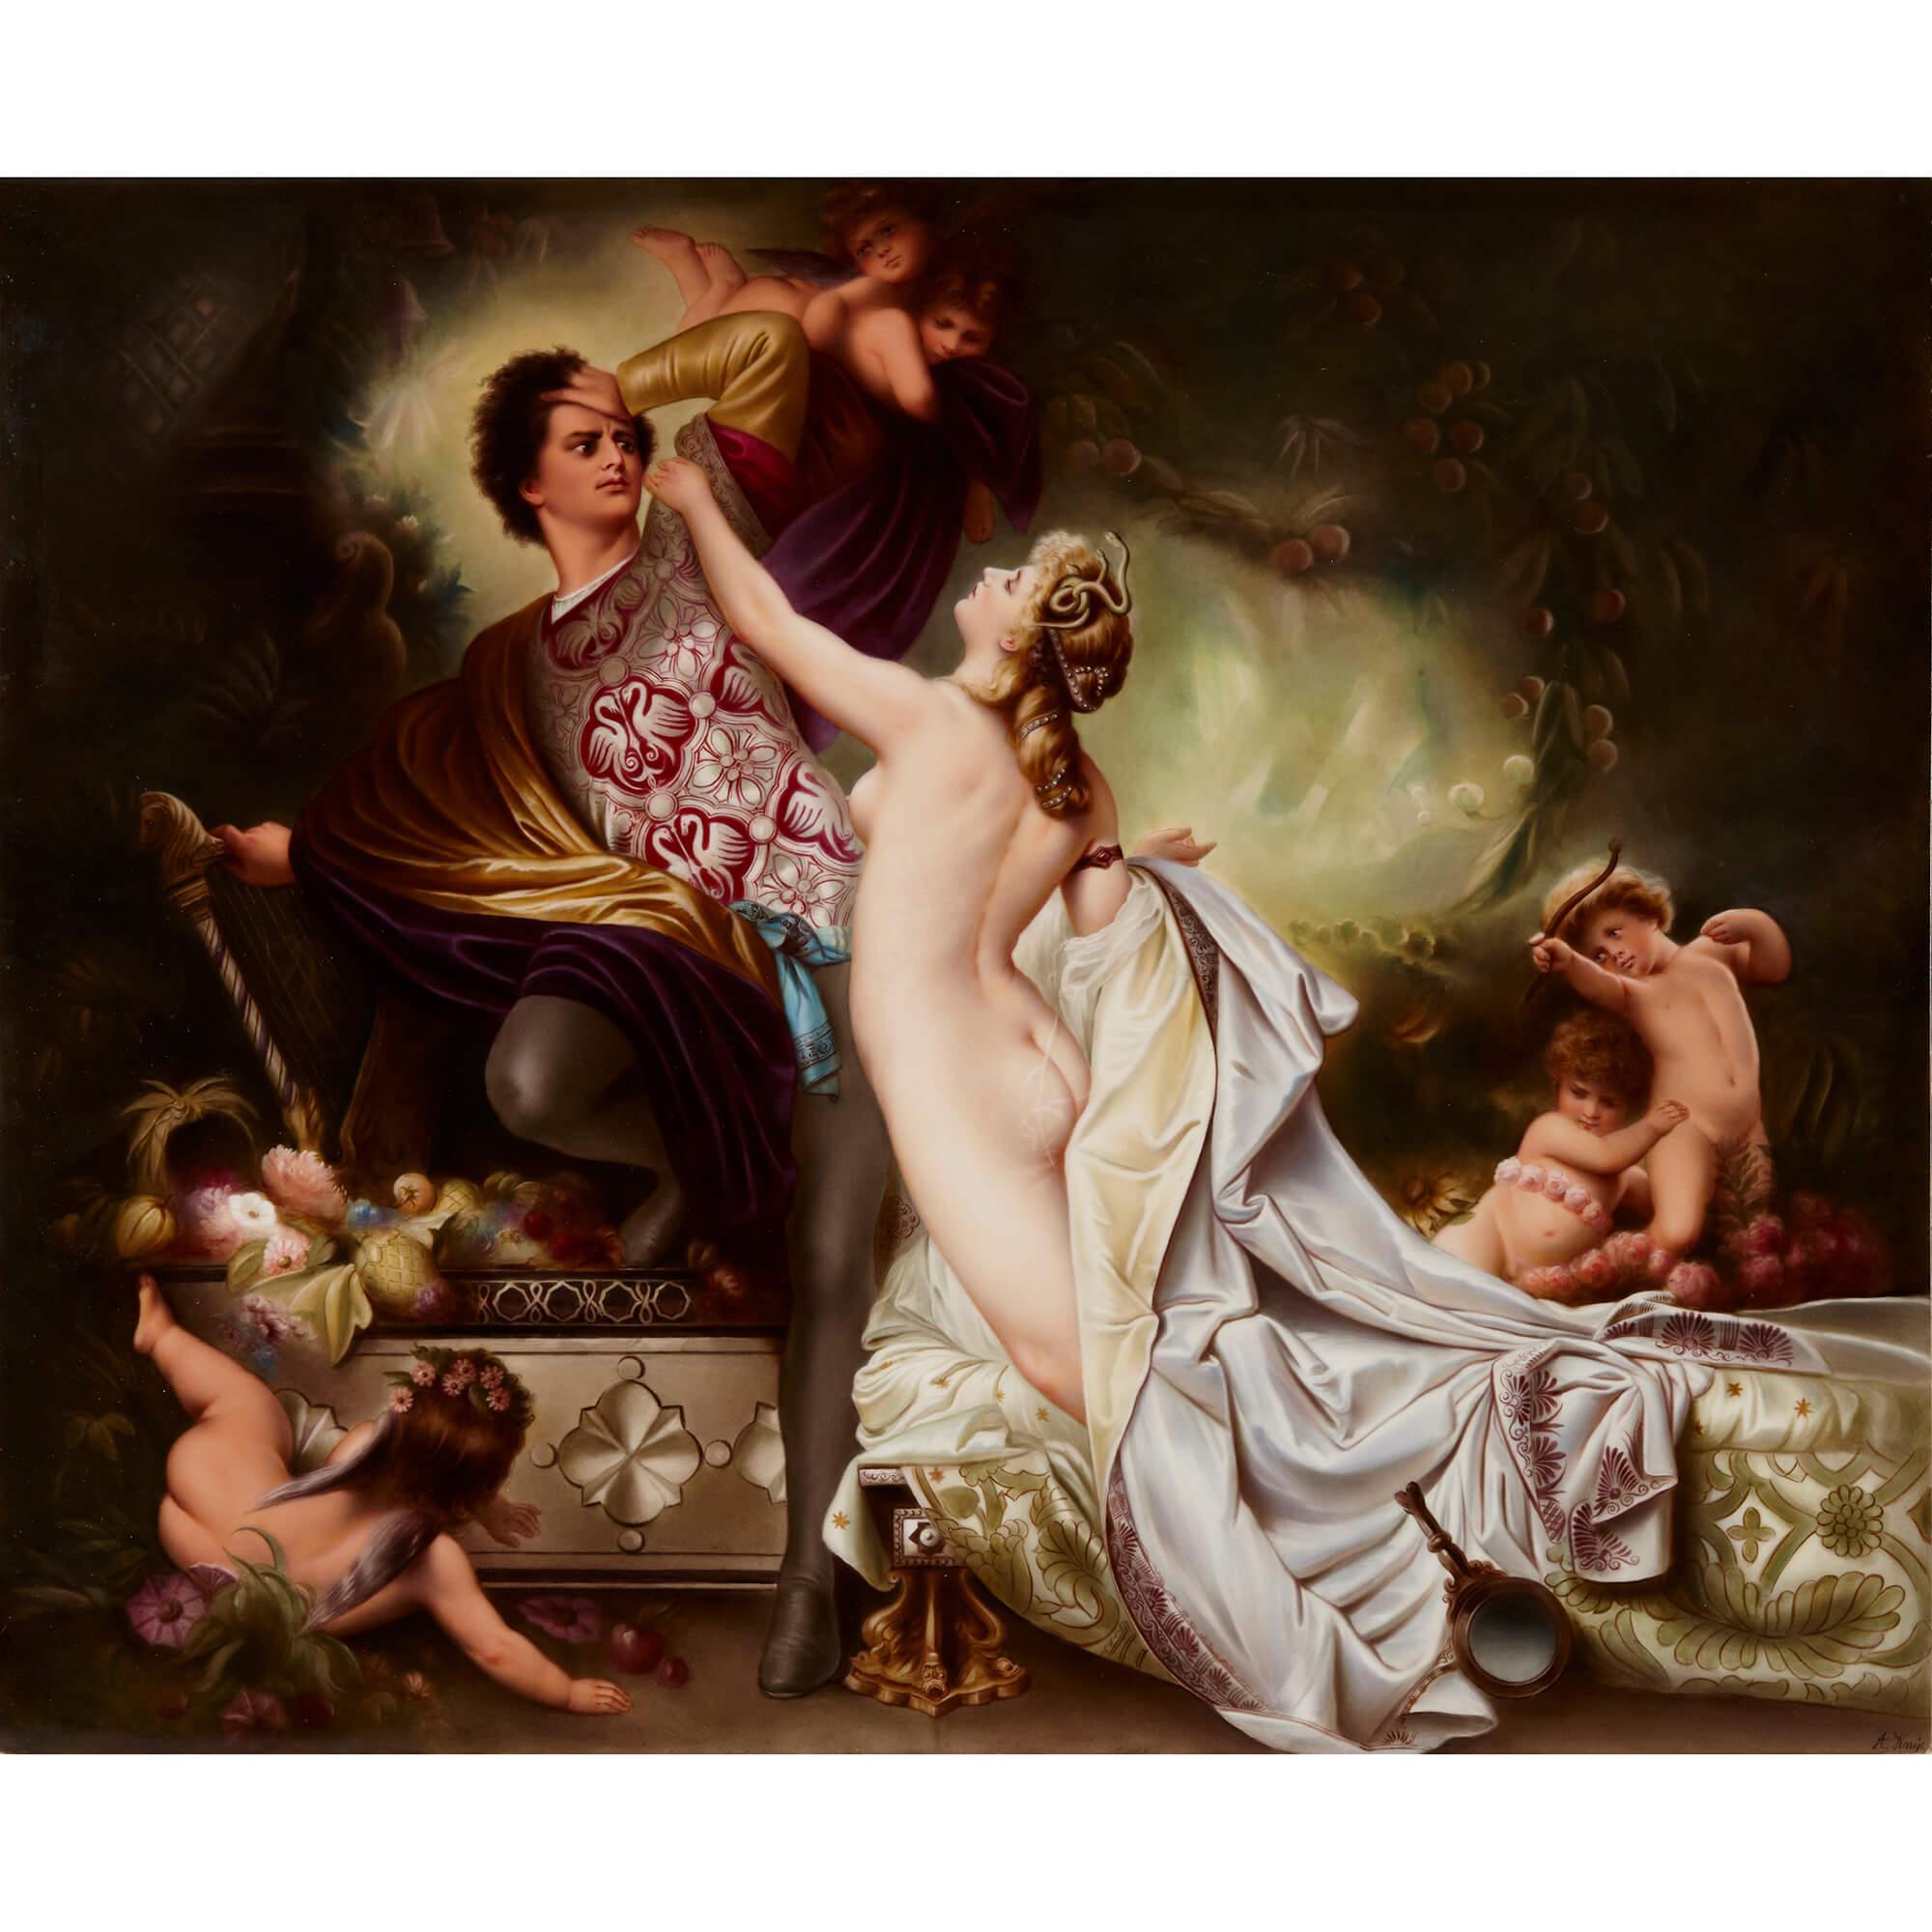 Large, very fine KPM porcelain plaque of 'Tannhauser und Venus,' after Knille
German, late 19th century
Measures: Frame: height 58cm, width 67cm, depth 7cm
Plaque: height 44cm, width 54cm

This outstanding porcelain plaque is one of the finest